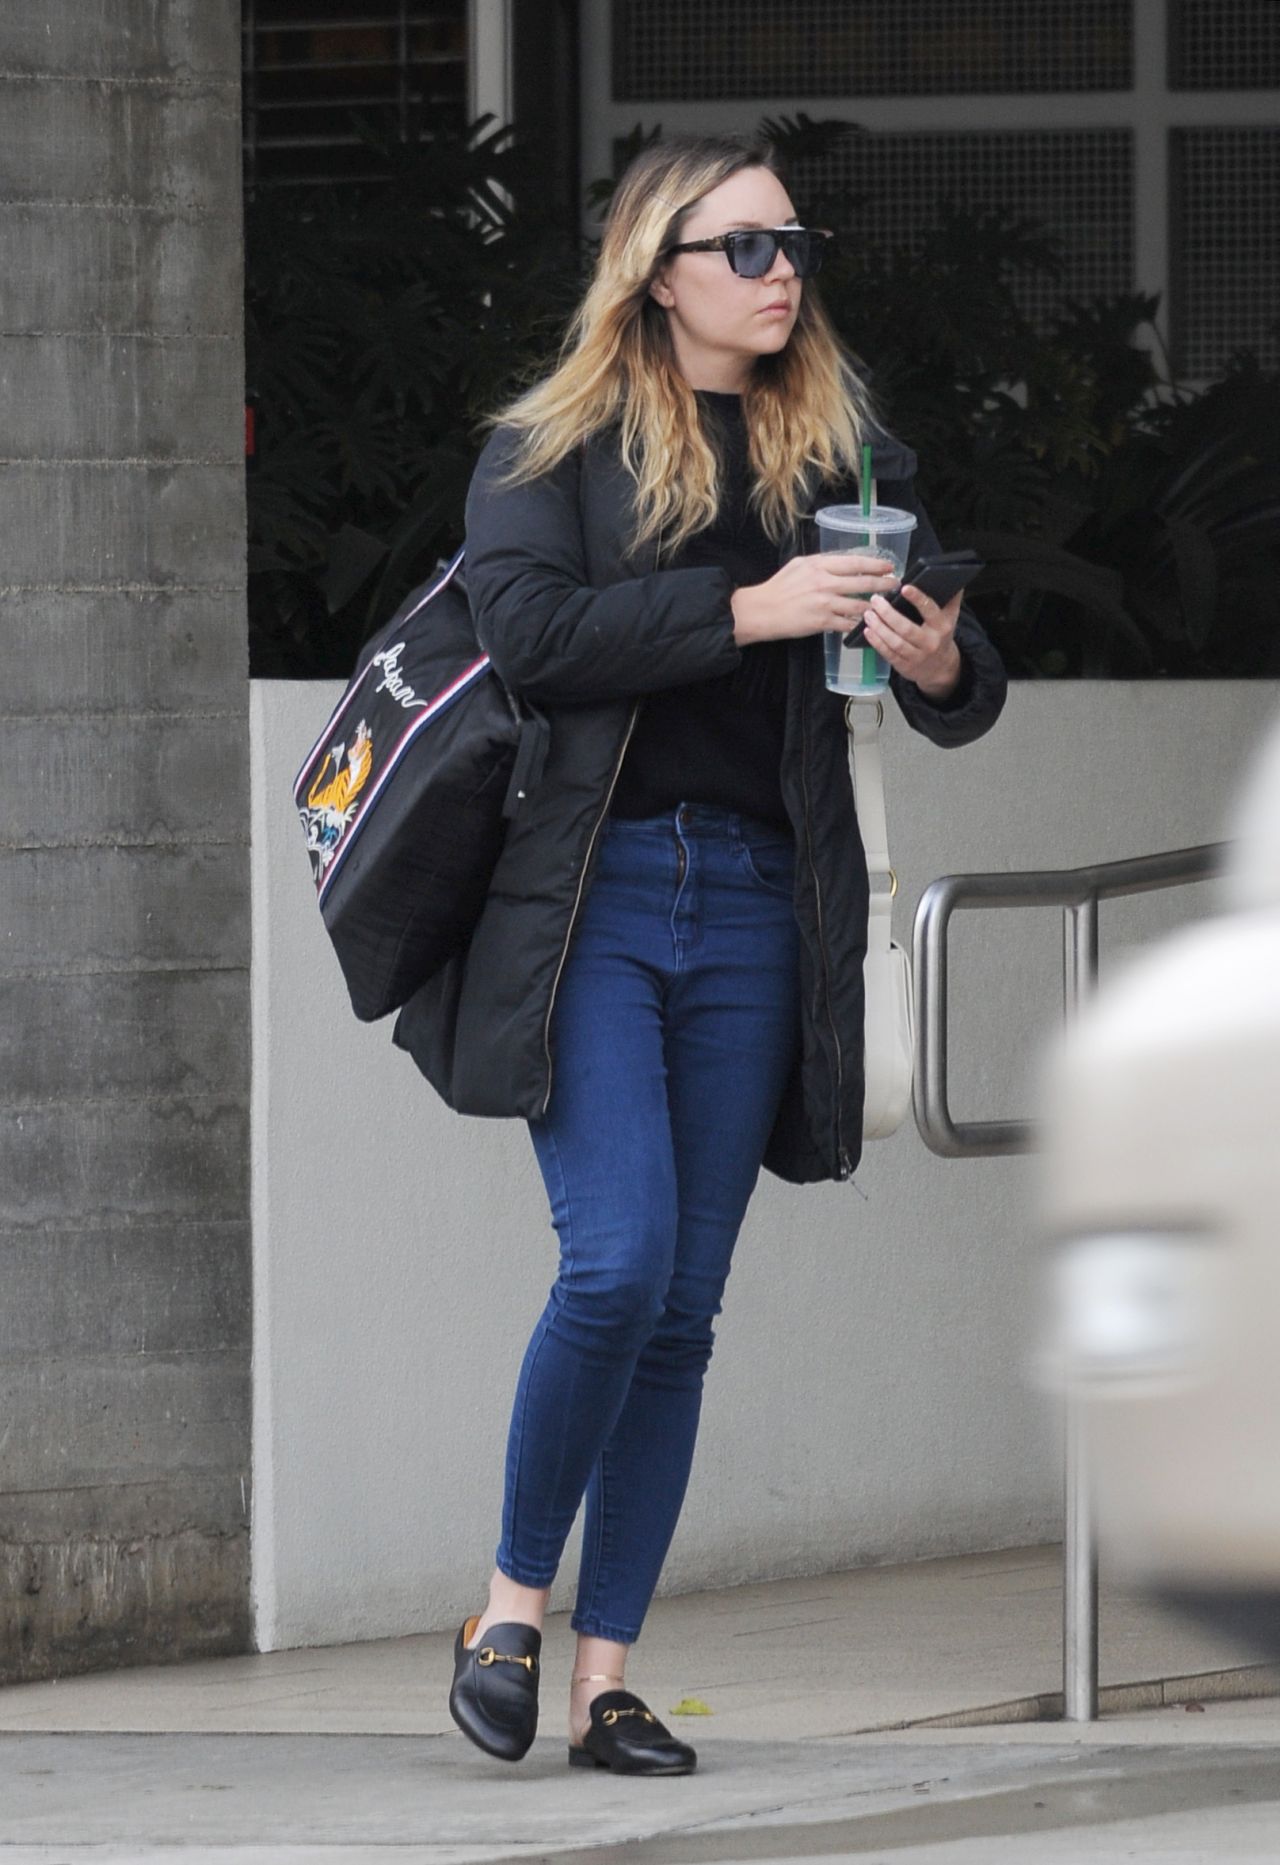 Amanda Bynes - Out in Los Angeles 12/06/20181280 x 1865